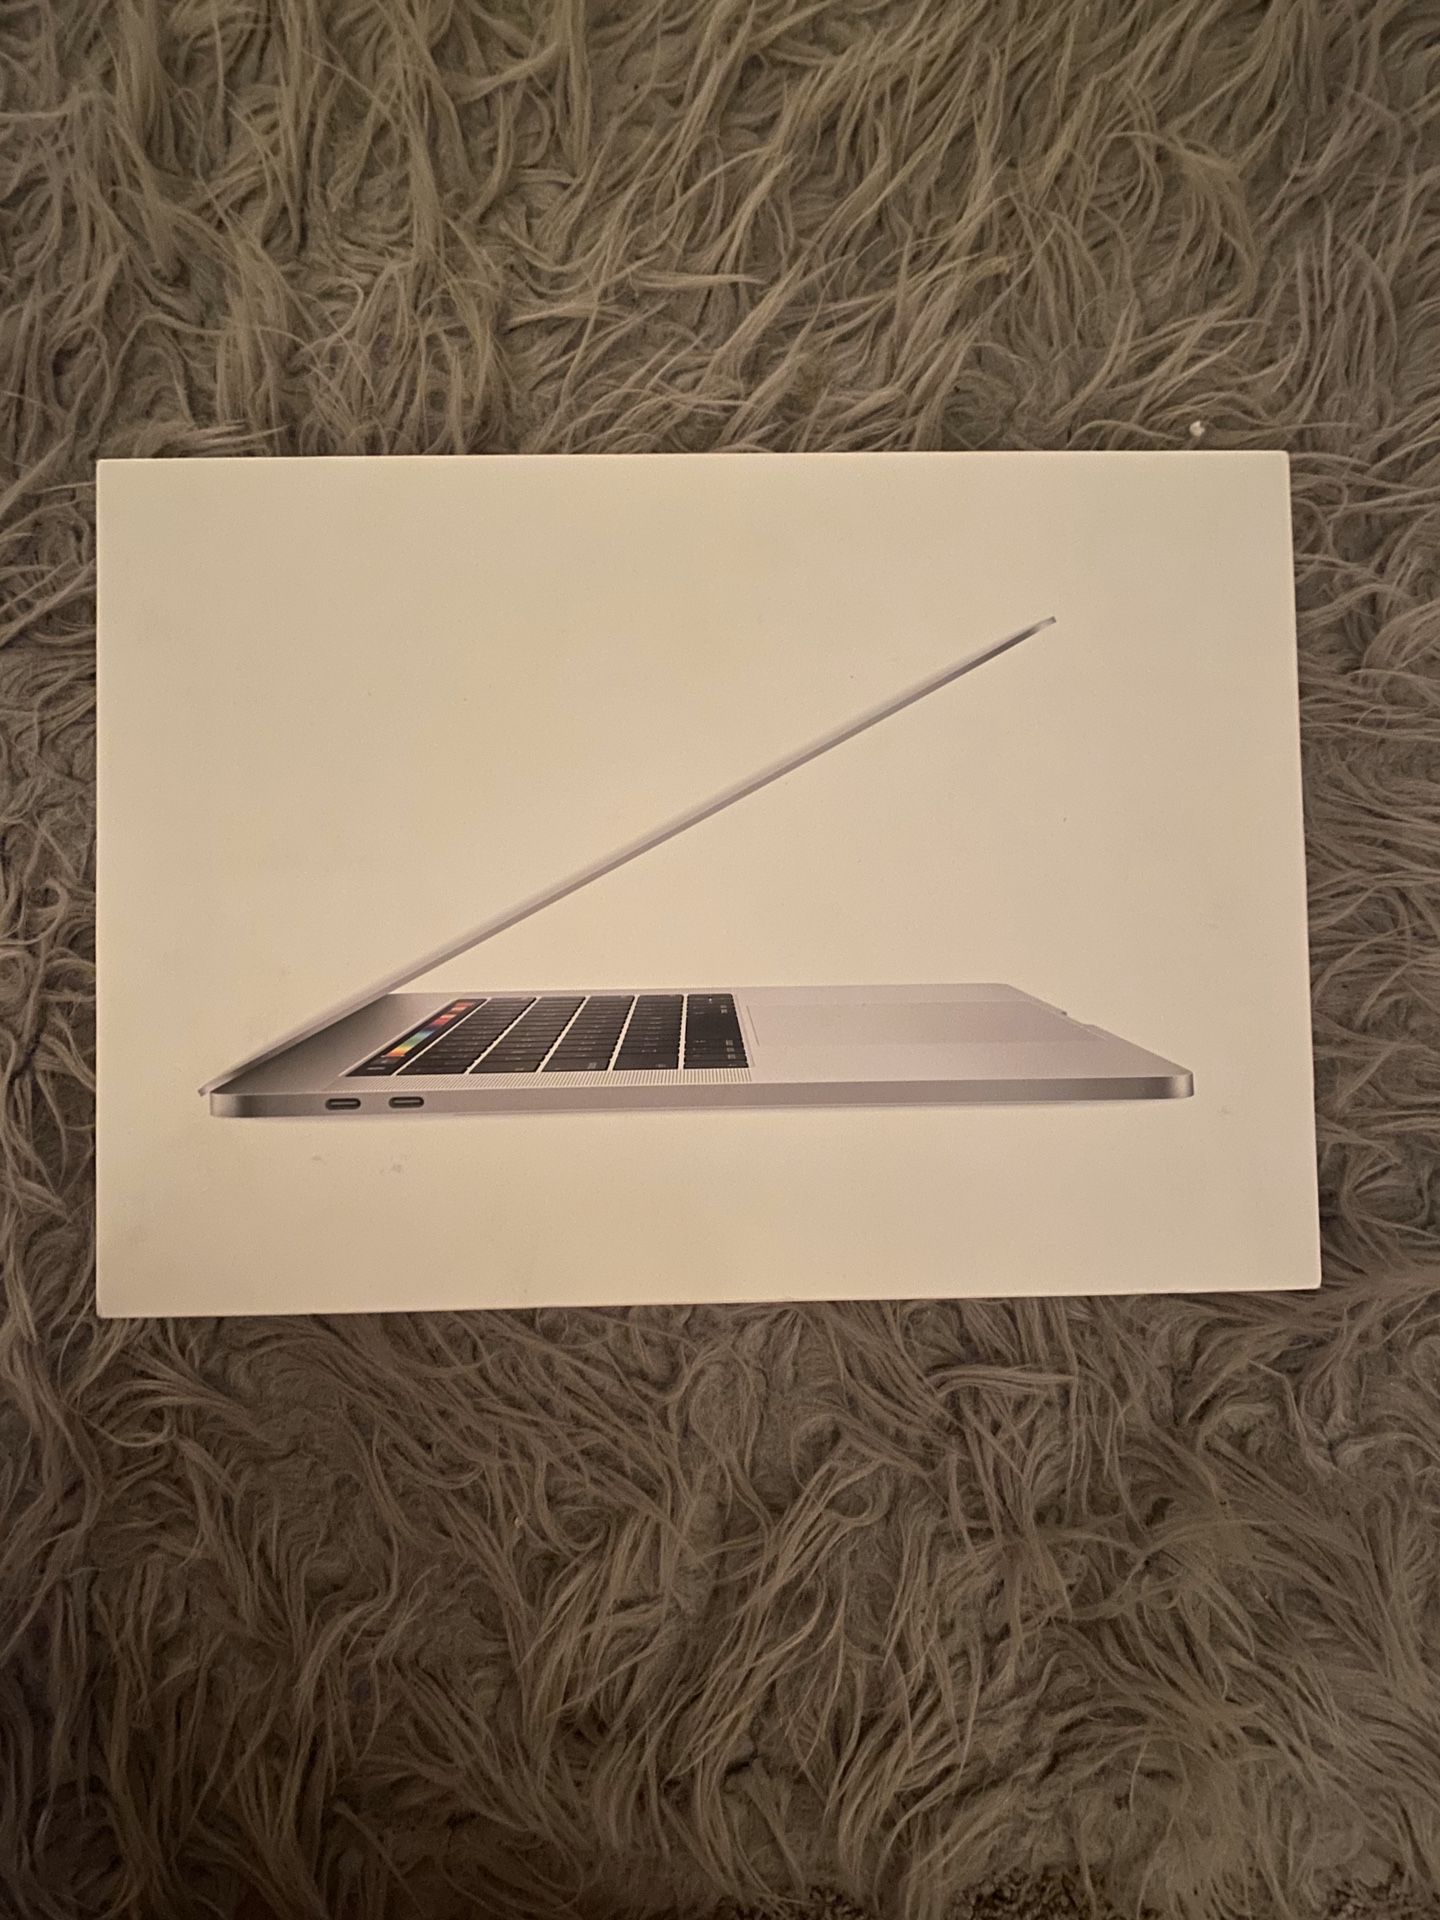 MacBook Pro - 2019 - Touch Bar $2,100 or best offer